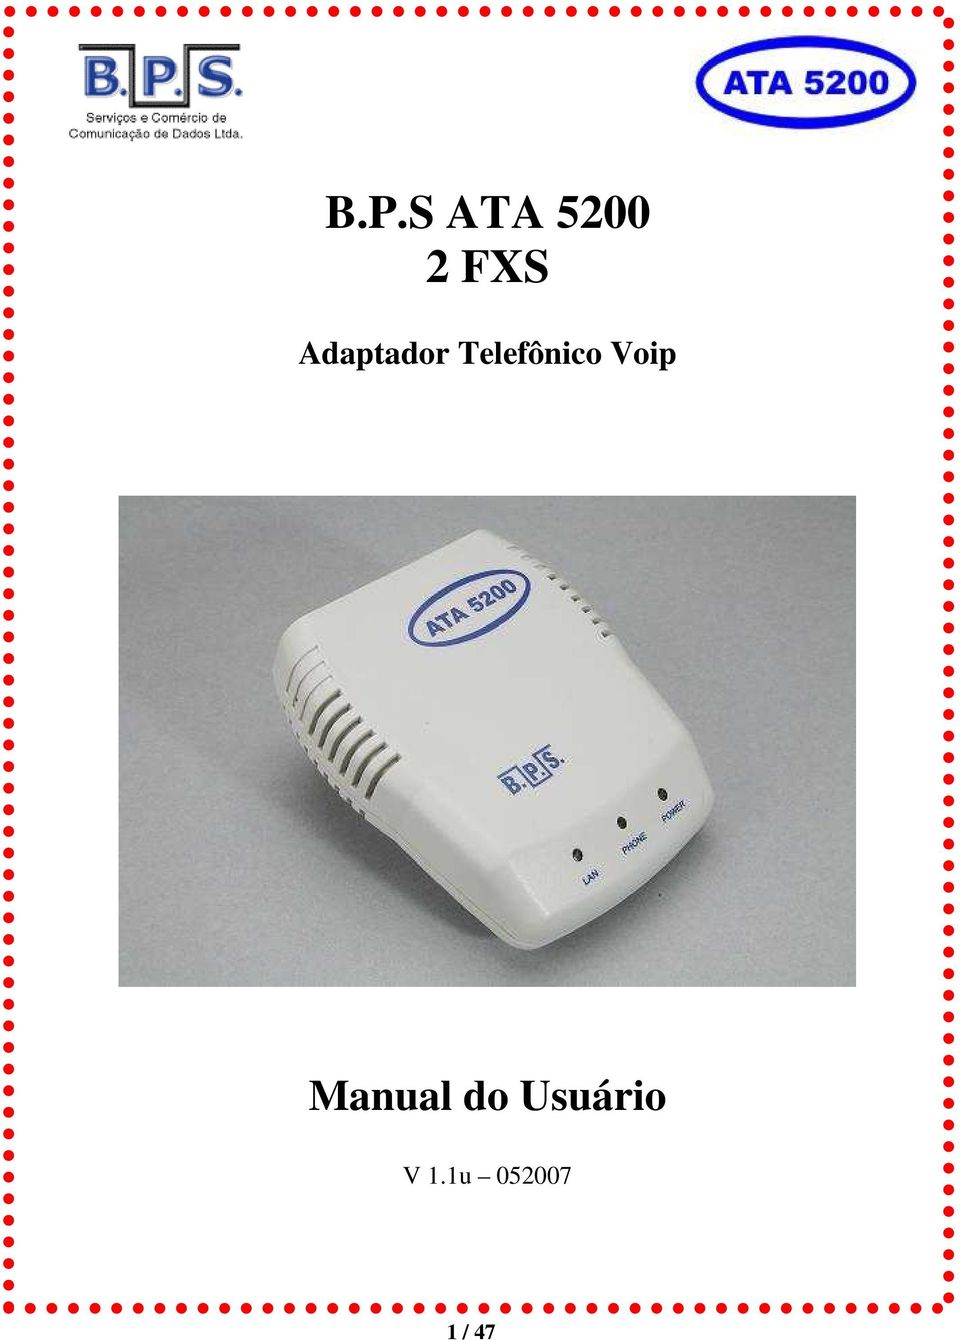 Voip Manual do